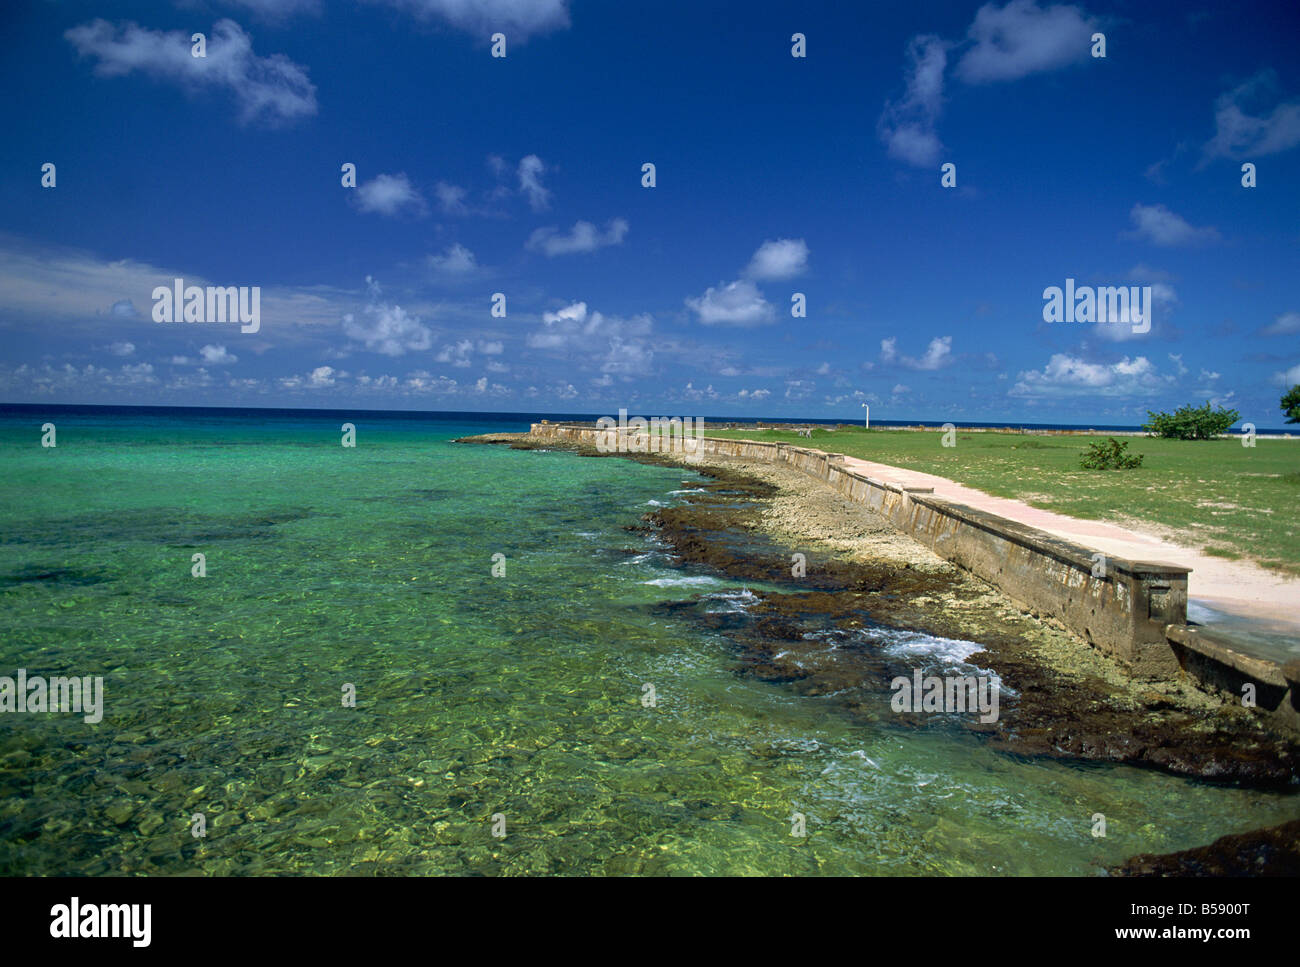 Playa Giron fringing coral reef, Bahia de Cochinos (Bay of Pigs), Cuba, West Indies, Central America Stock Photo